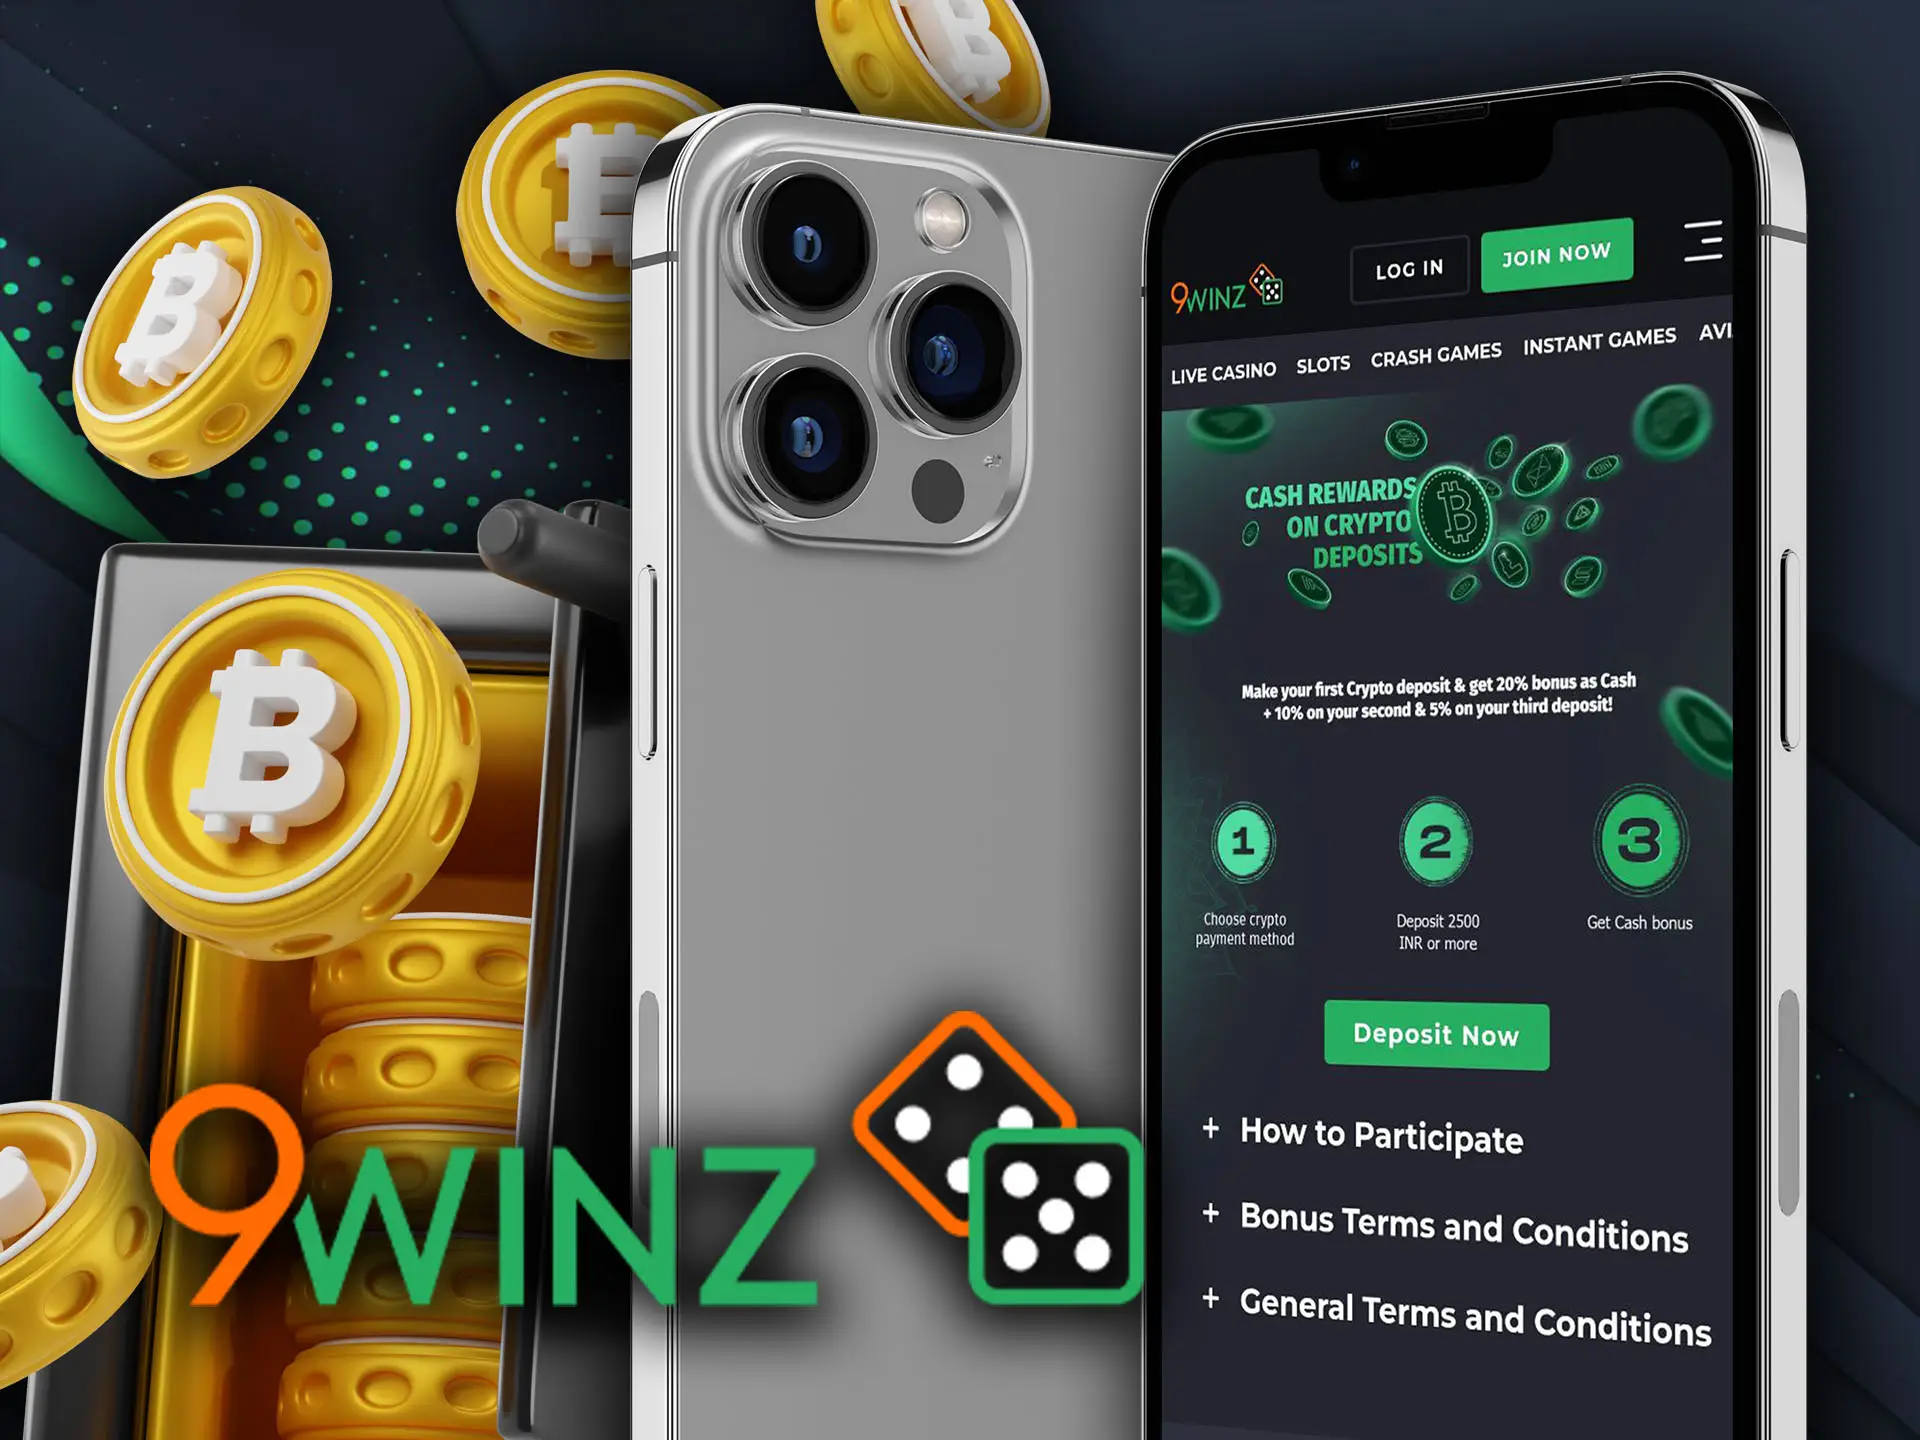 Use crypro for making deposits in 9winz mobile version.